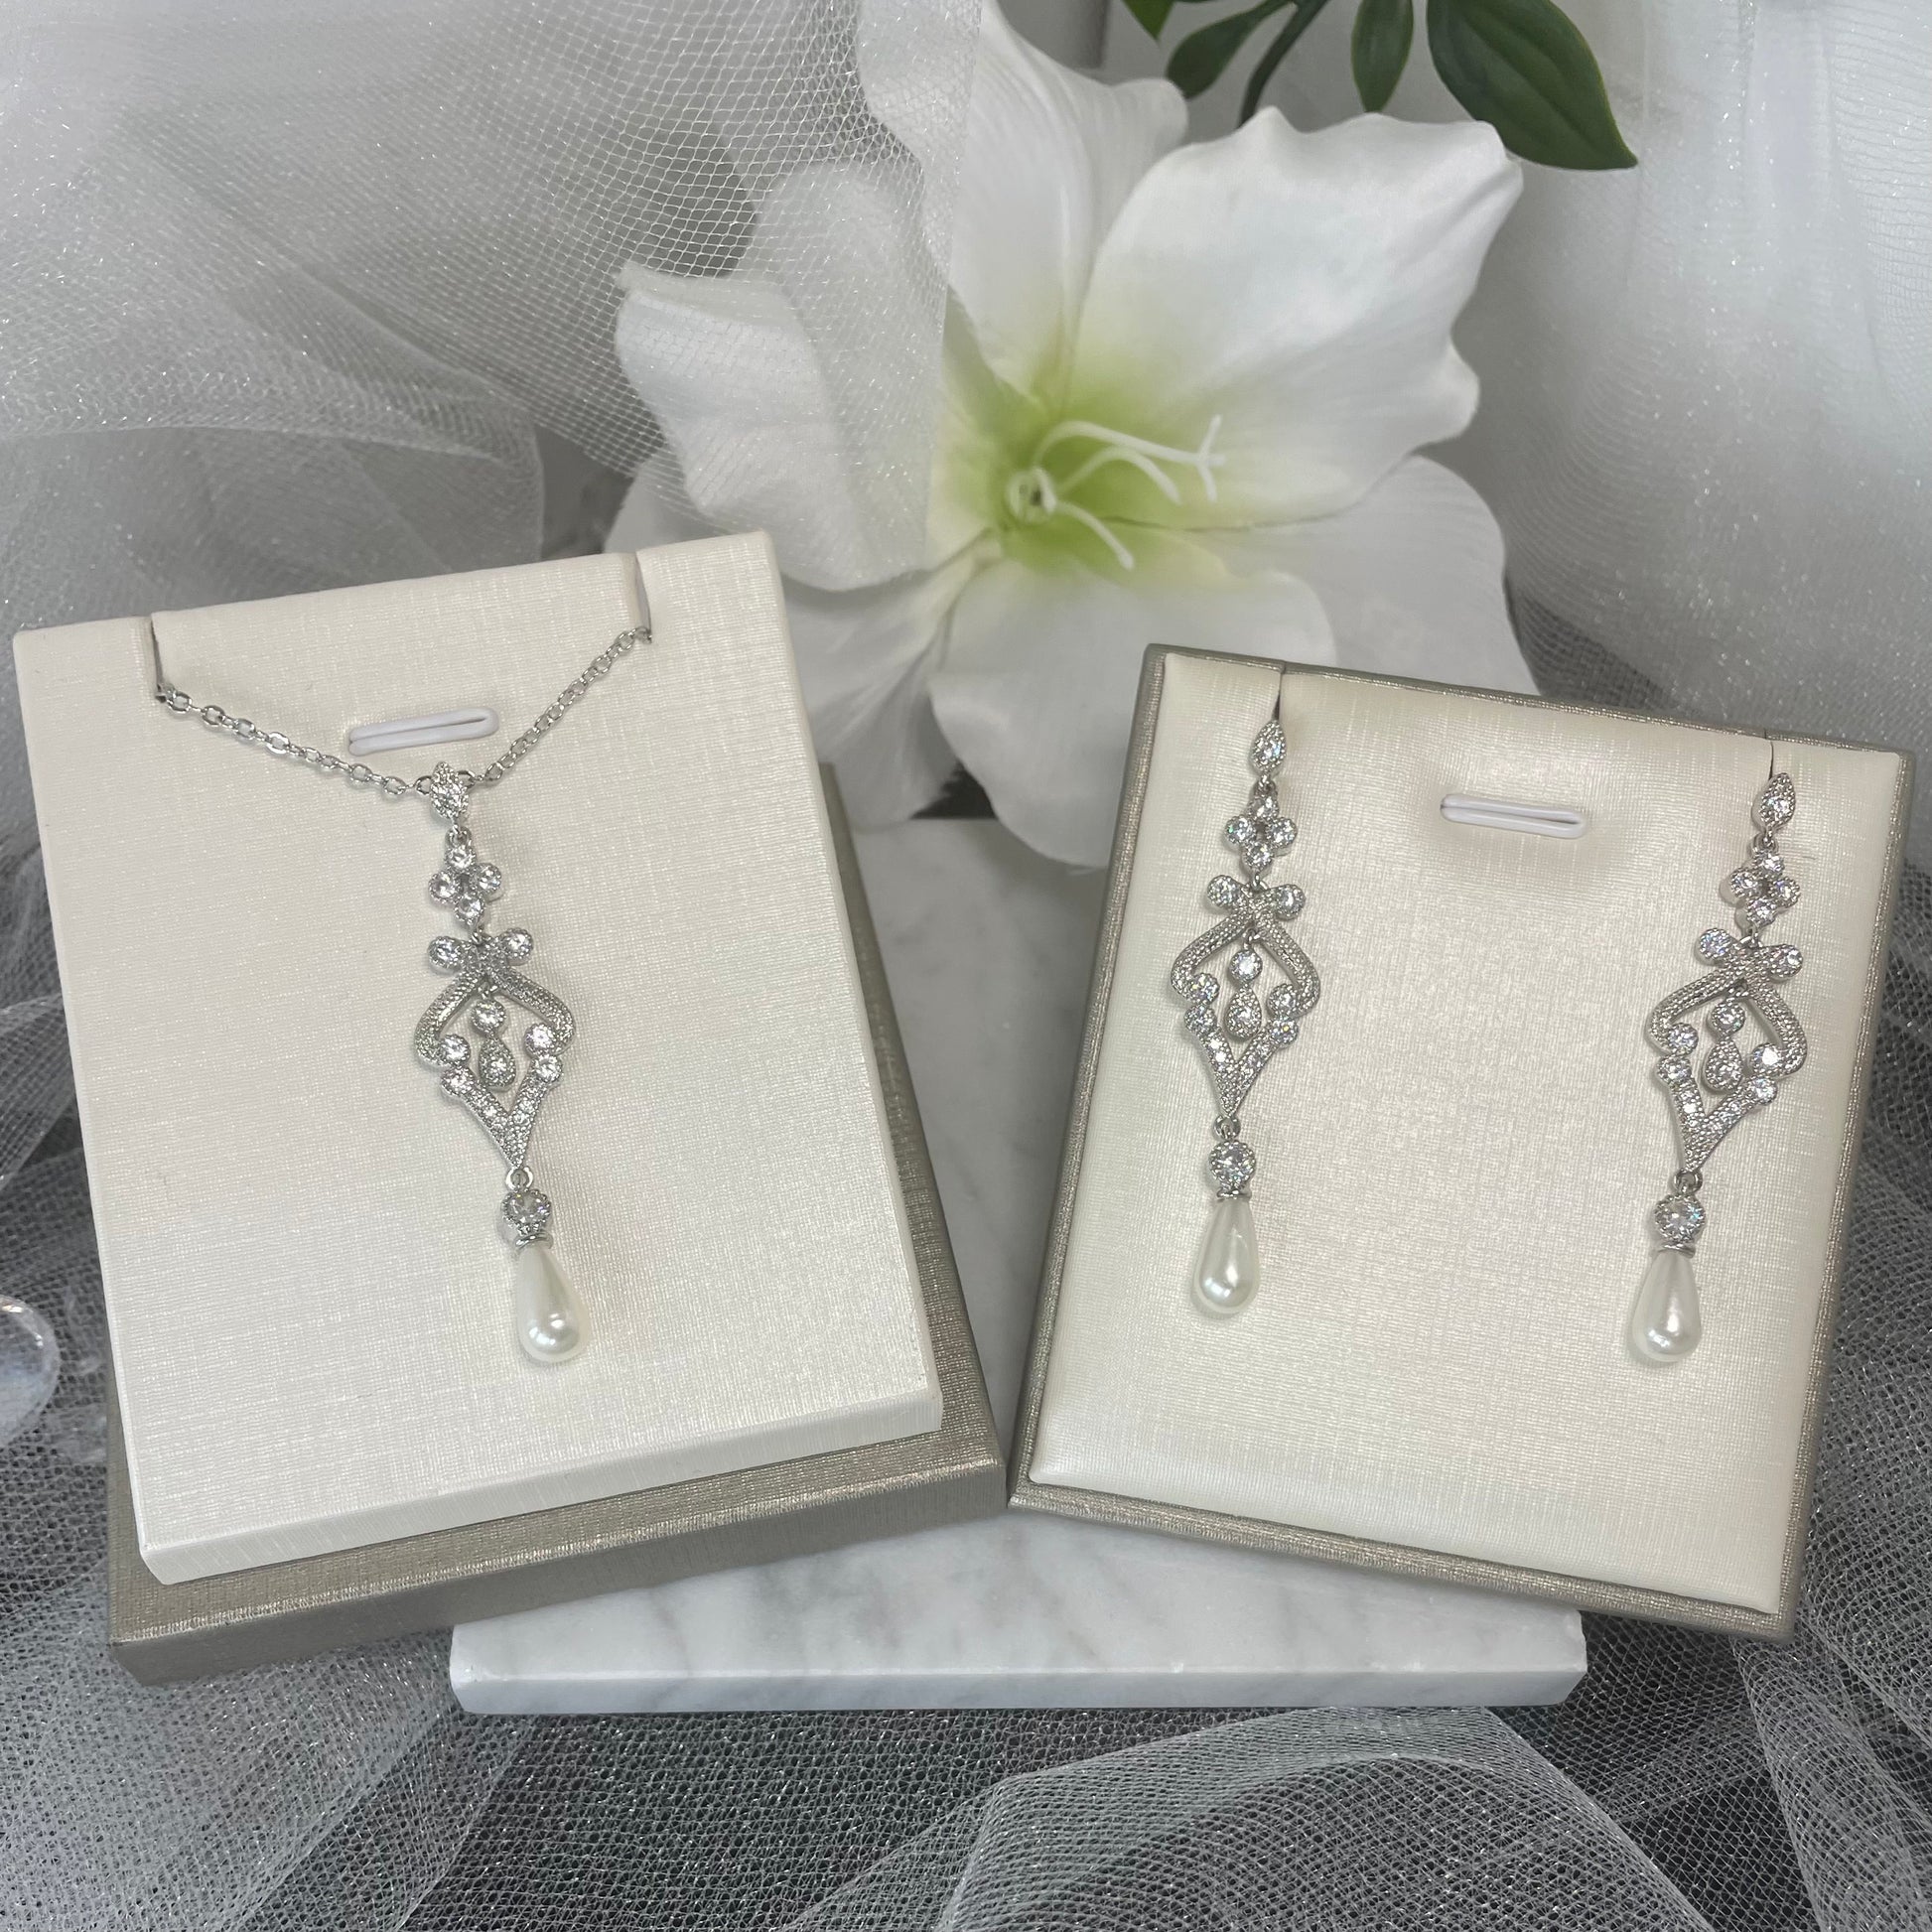 Elegant Maia Crystal Pearl Earring and Necklace Set with Indian-inspired design, ideal for adding cultural charm to bridal or wedding guest attire.